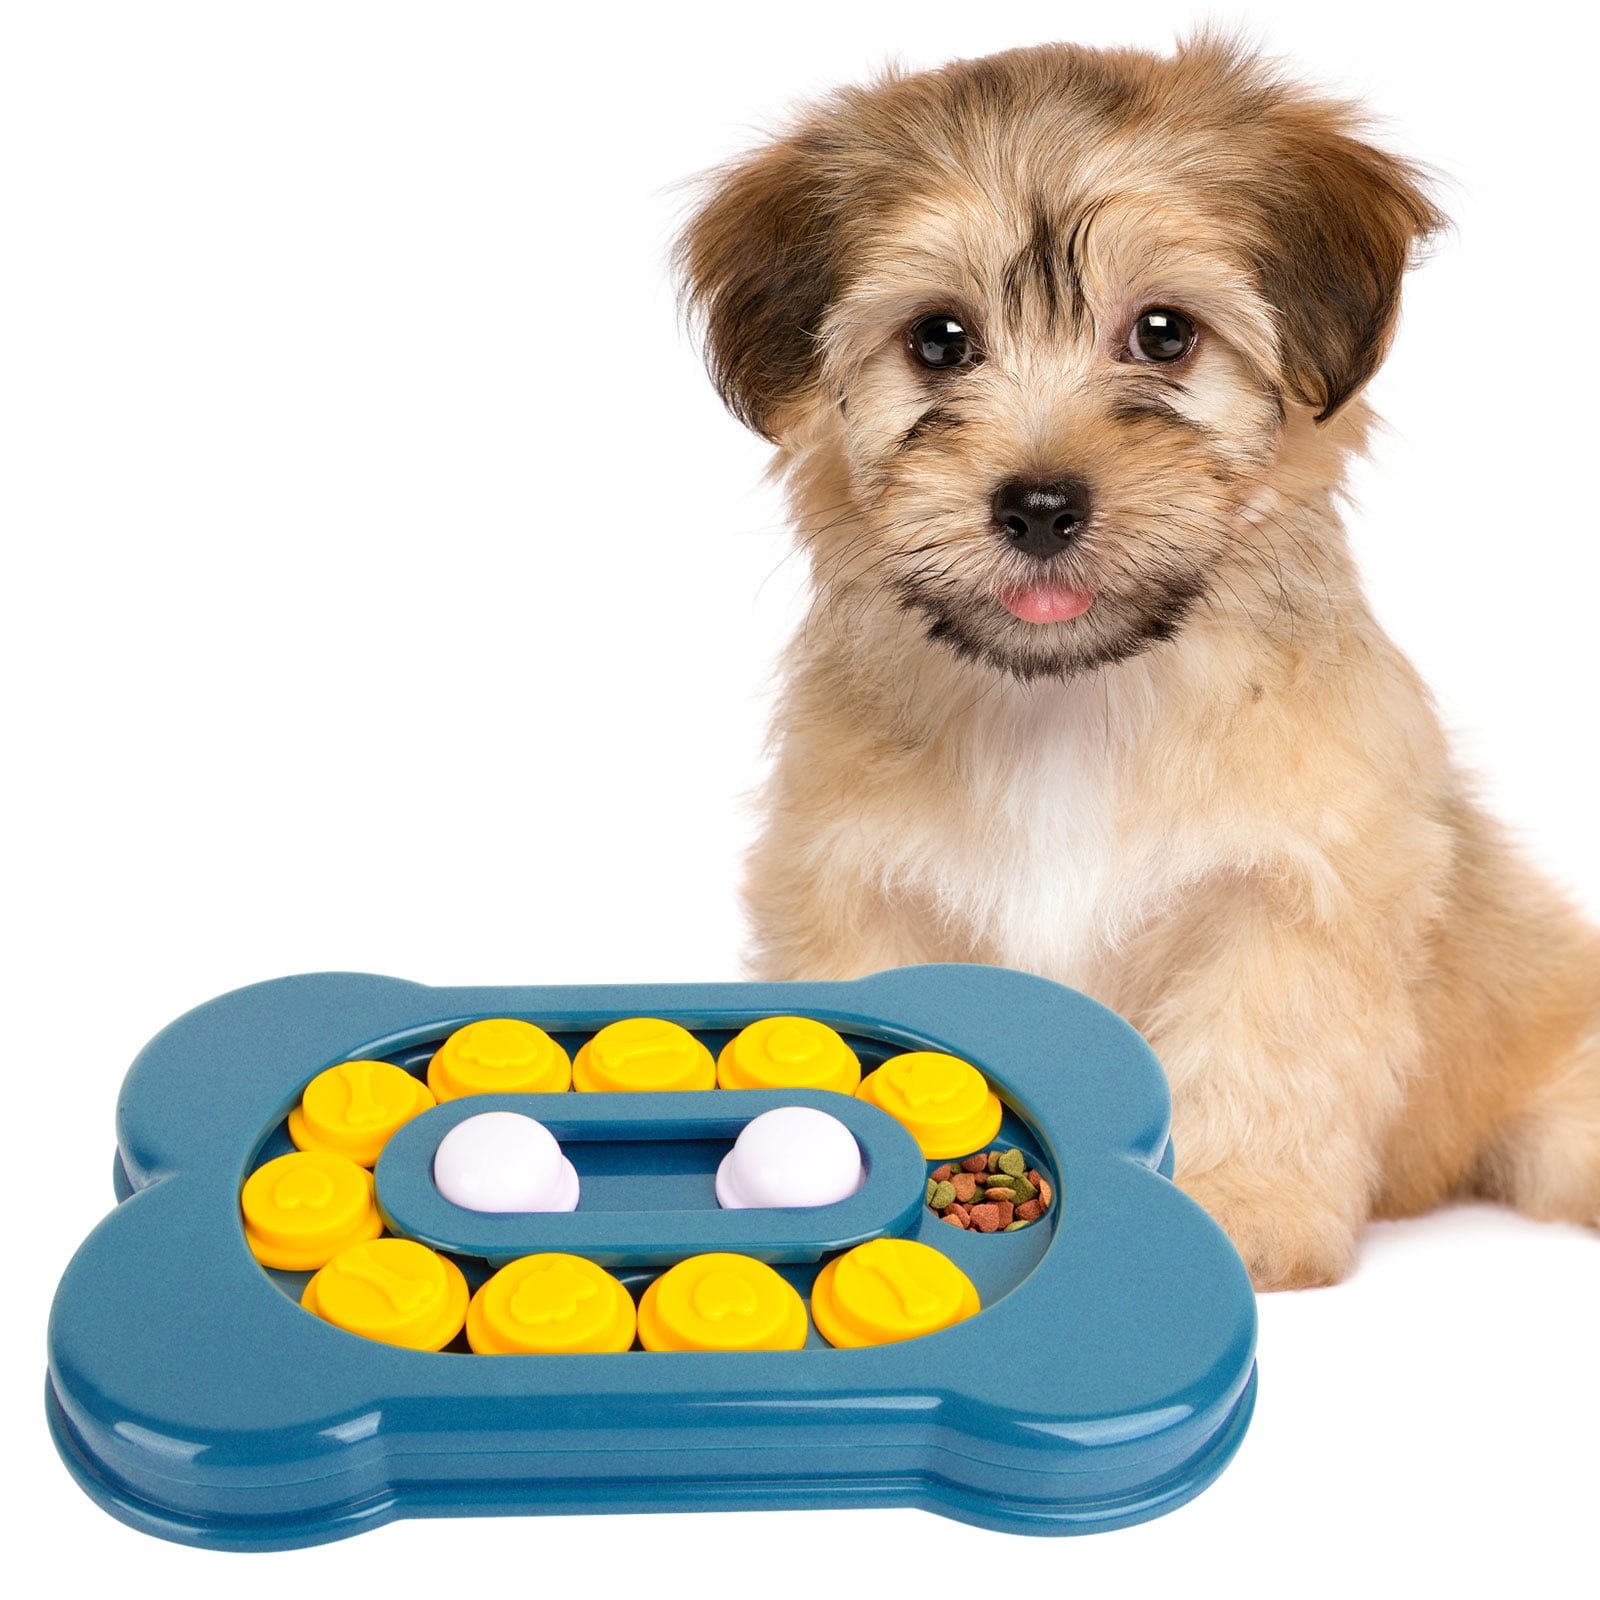 TWINKOPAT dog puzzle treat toy, interactive toy for puppy small medium  breed dogs, treat dispensing ball